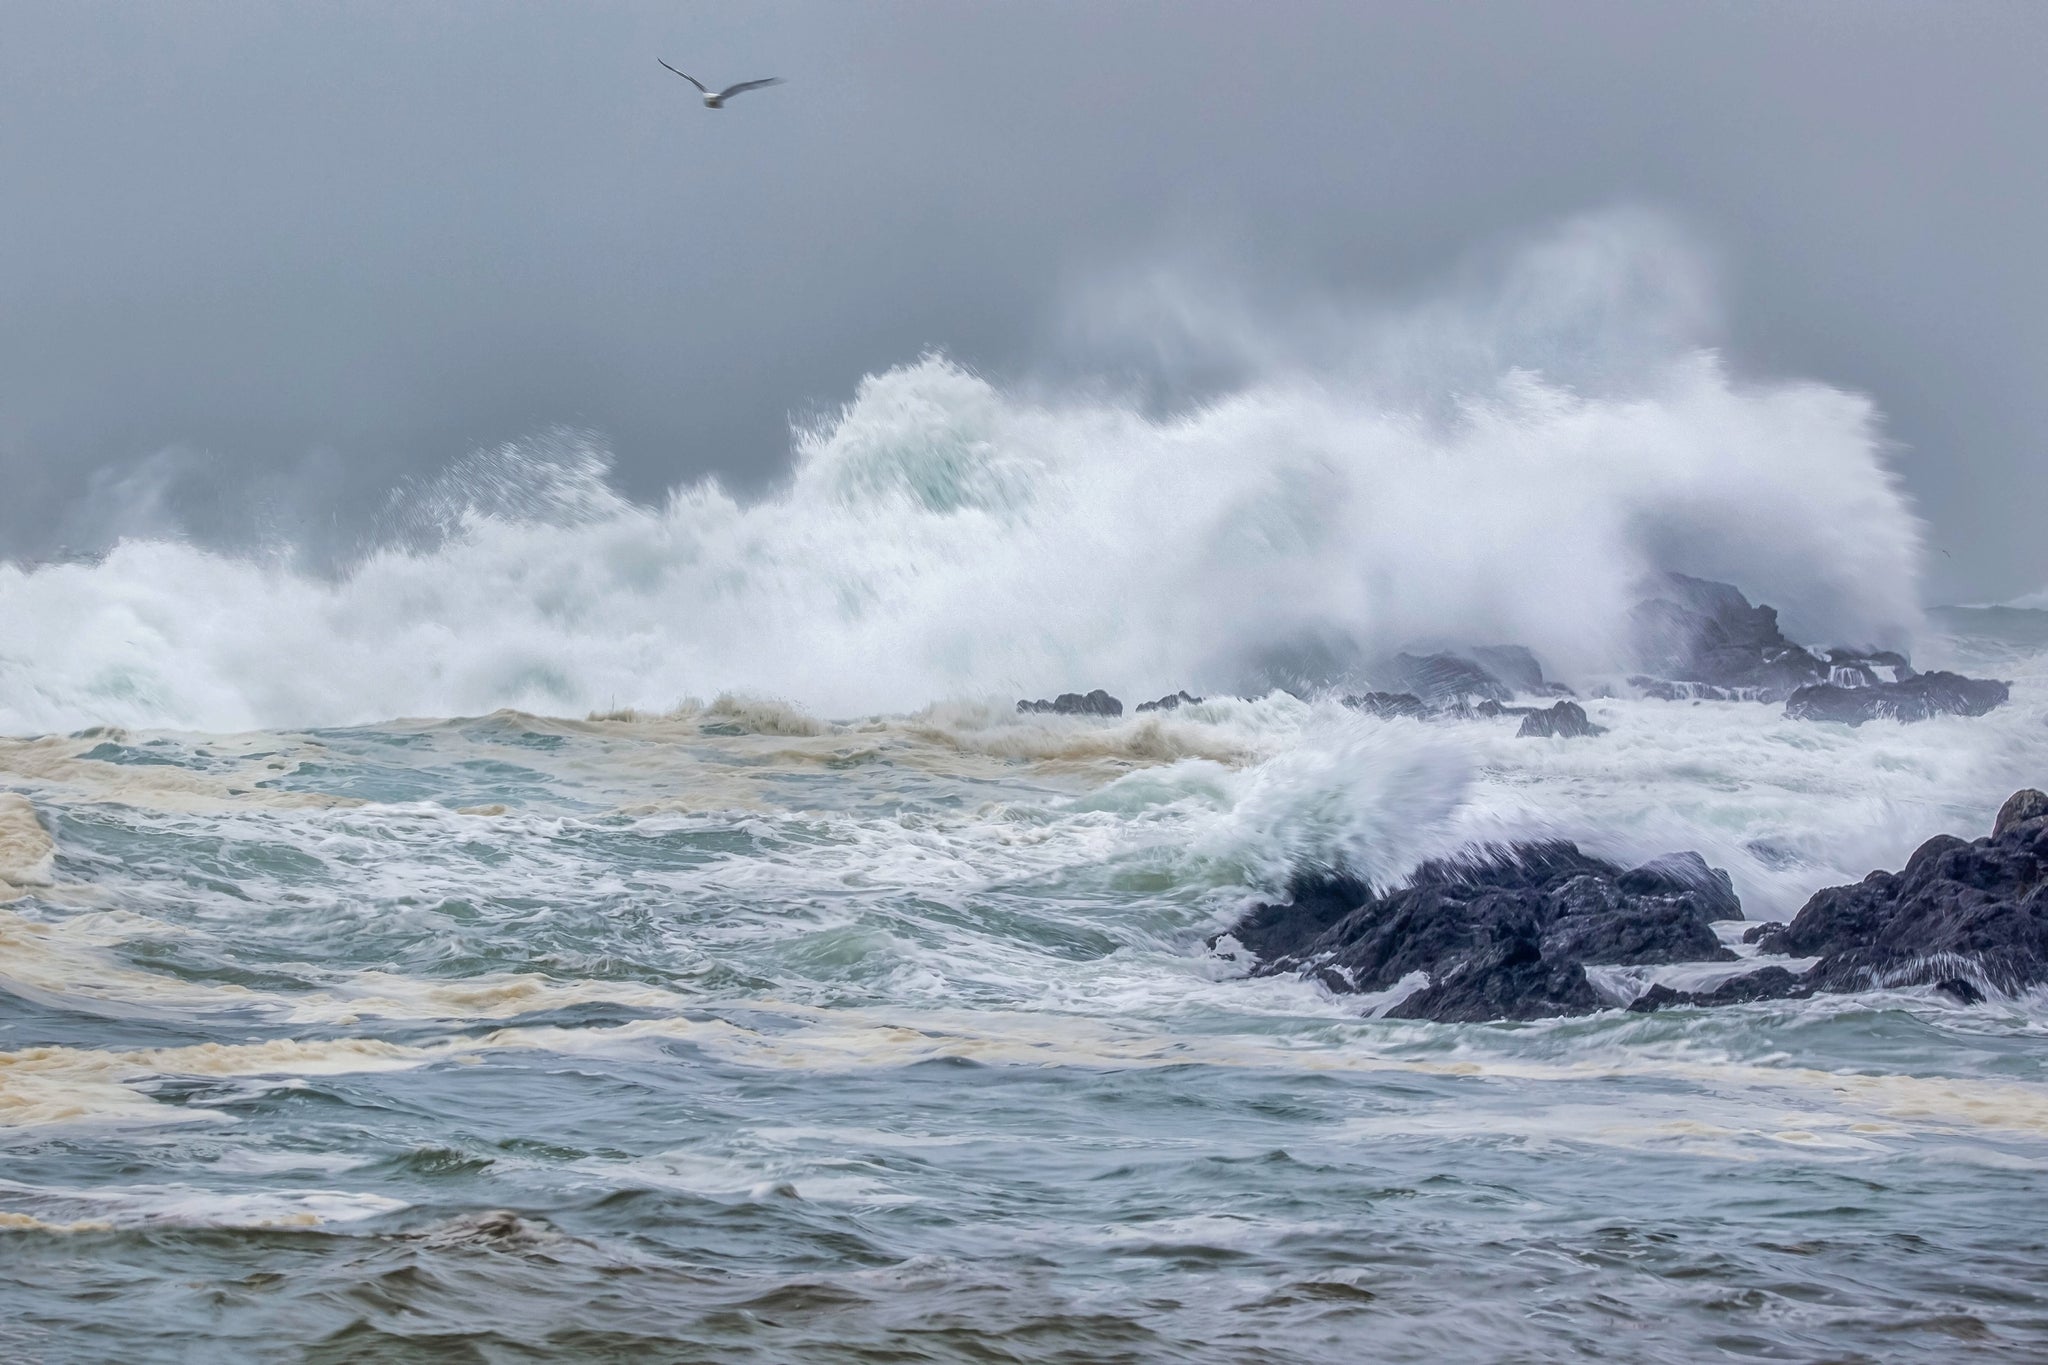 Pacific Ocean during a raging winter storm